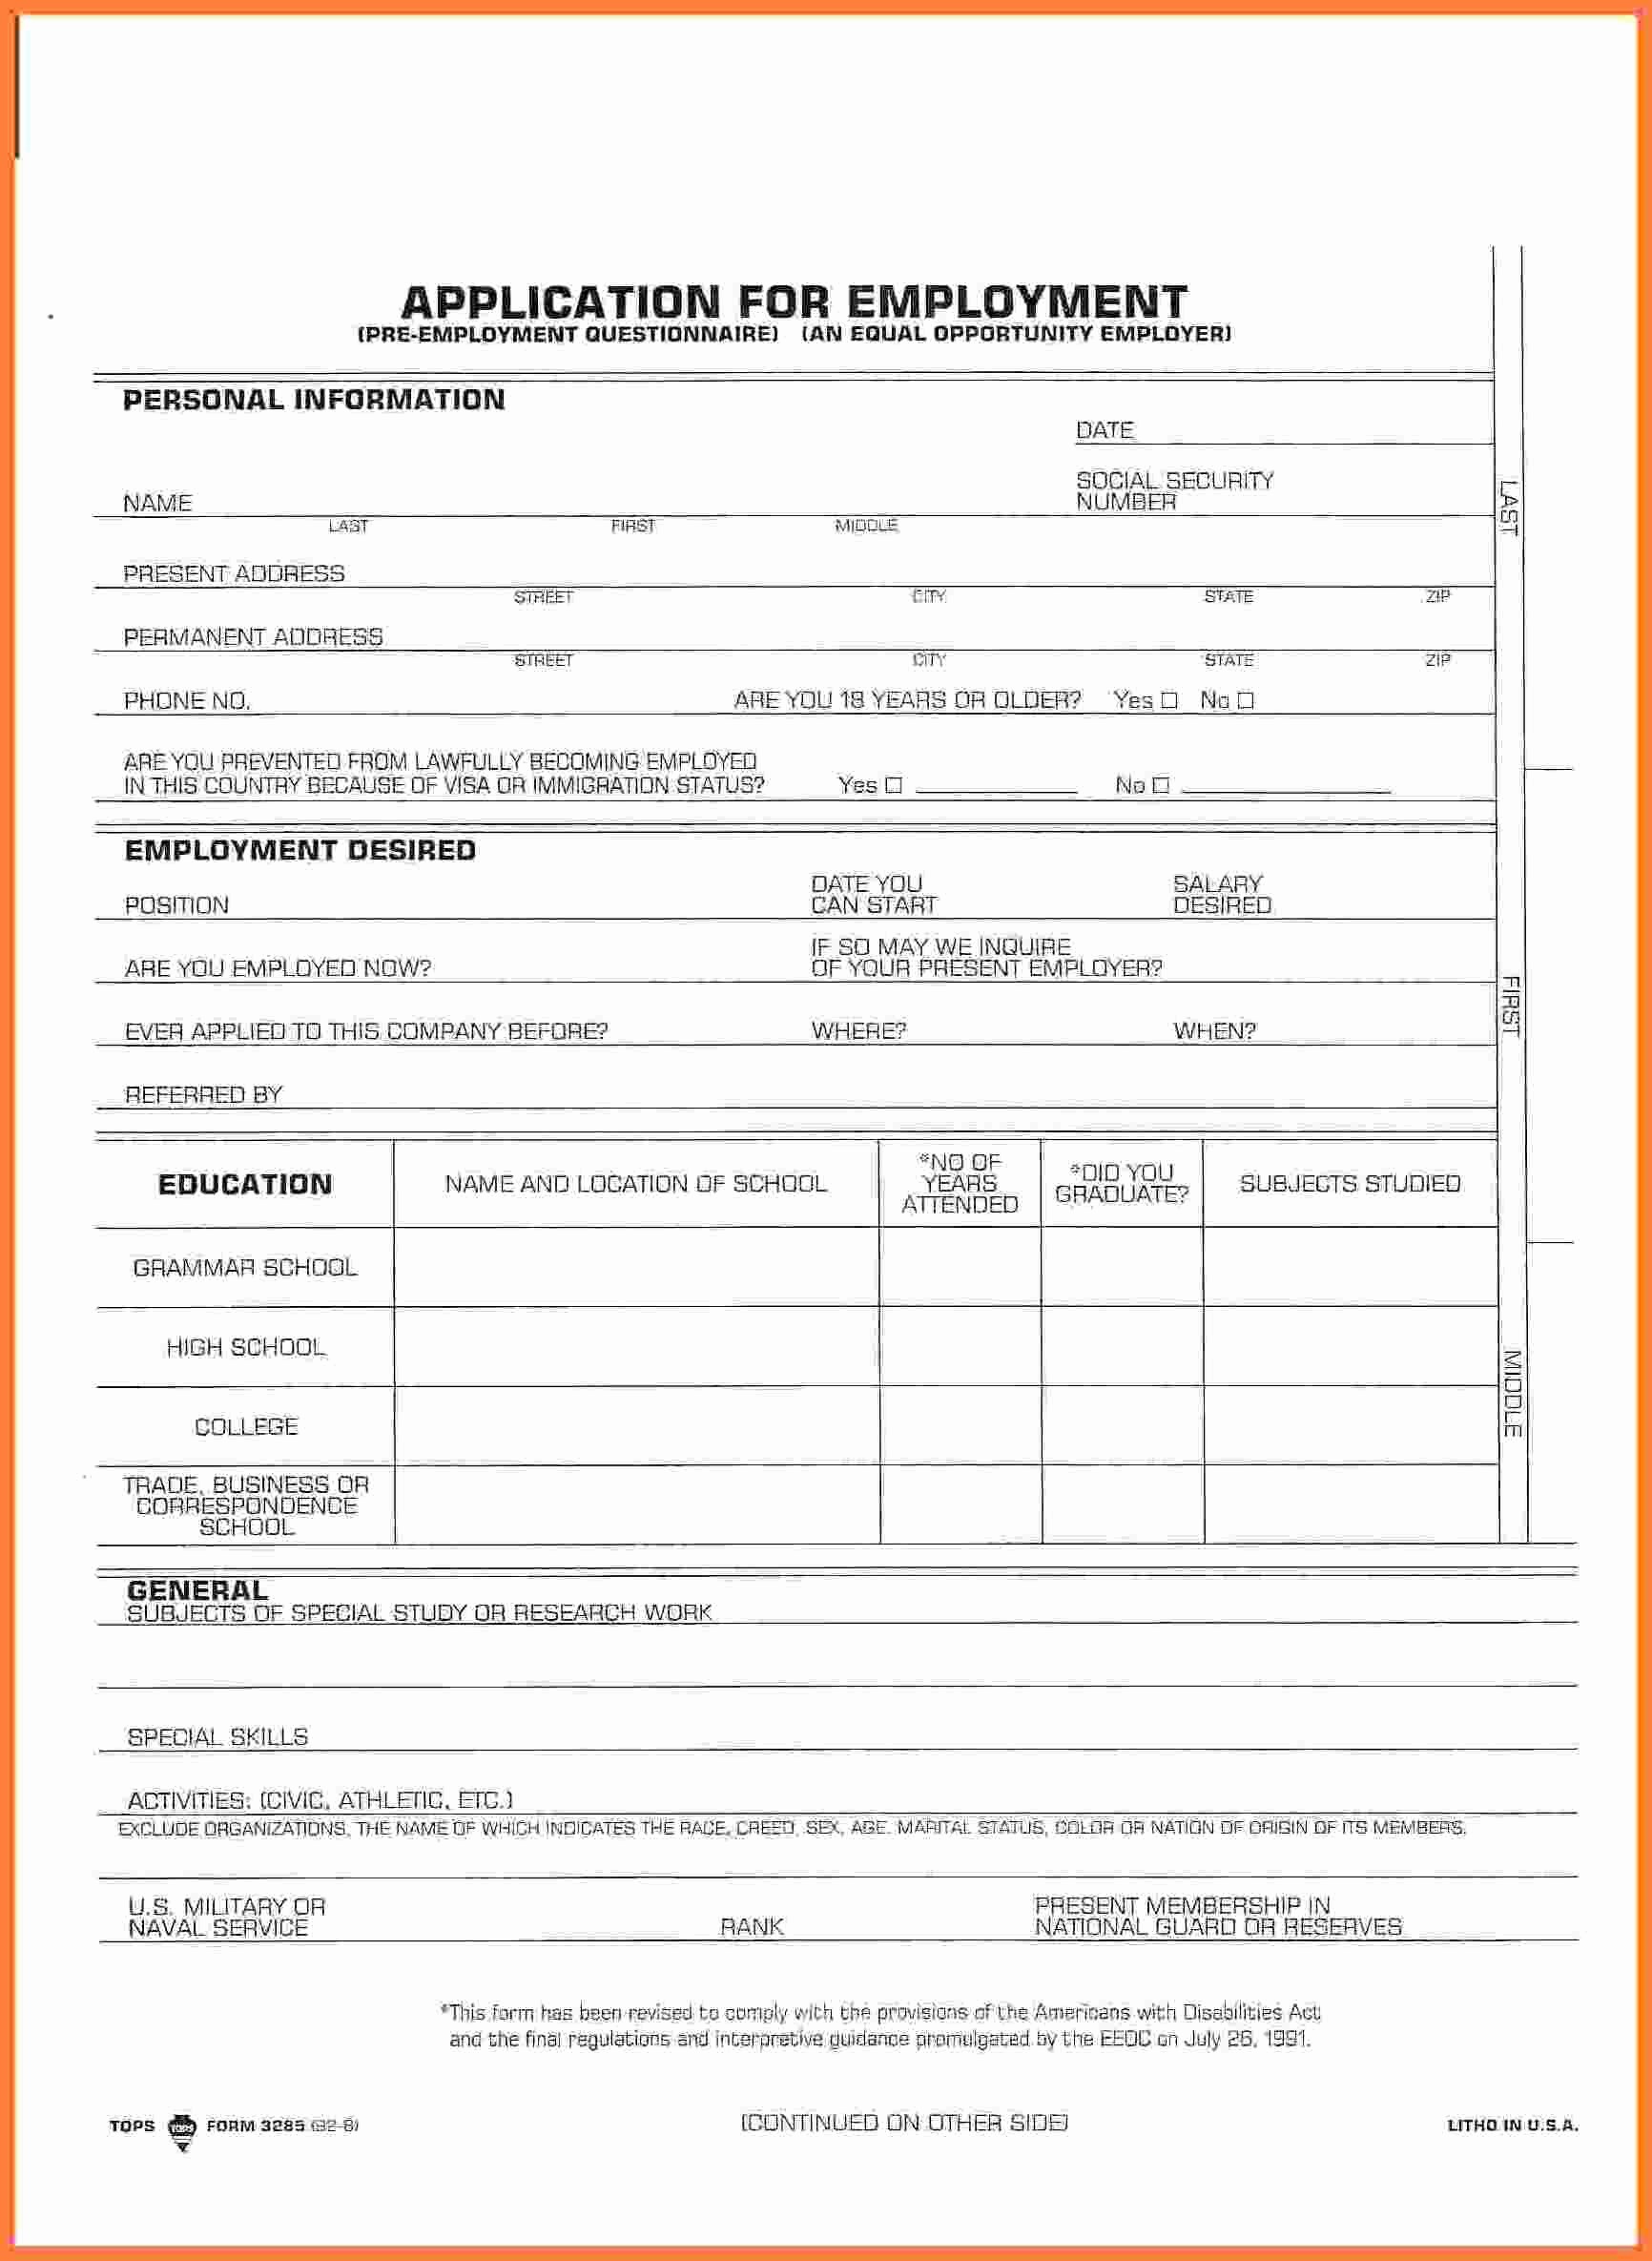 Generic Application for Employment form Best Of 8 Generic Application for Employment